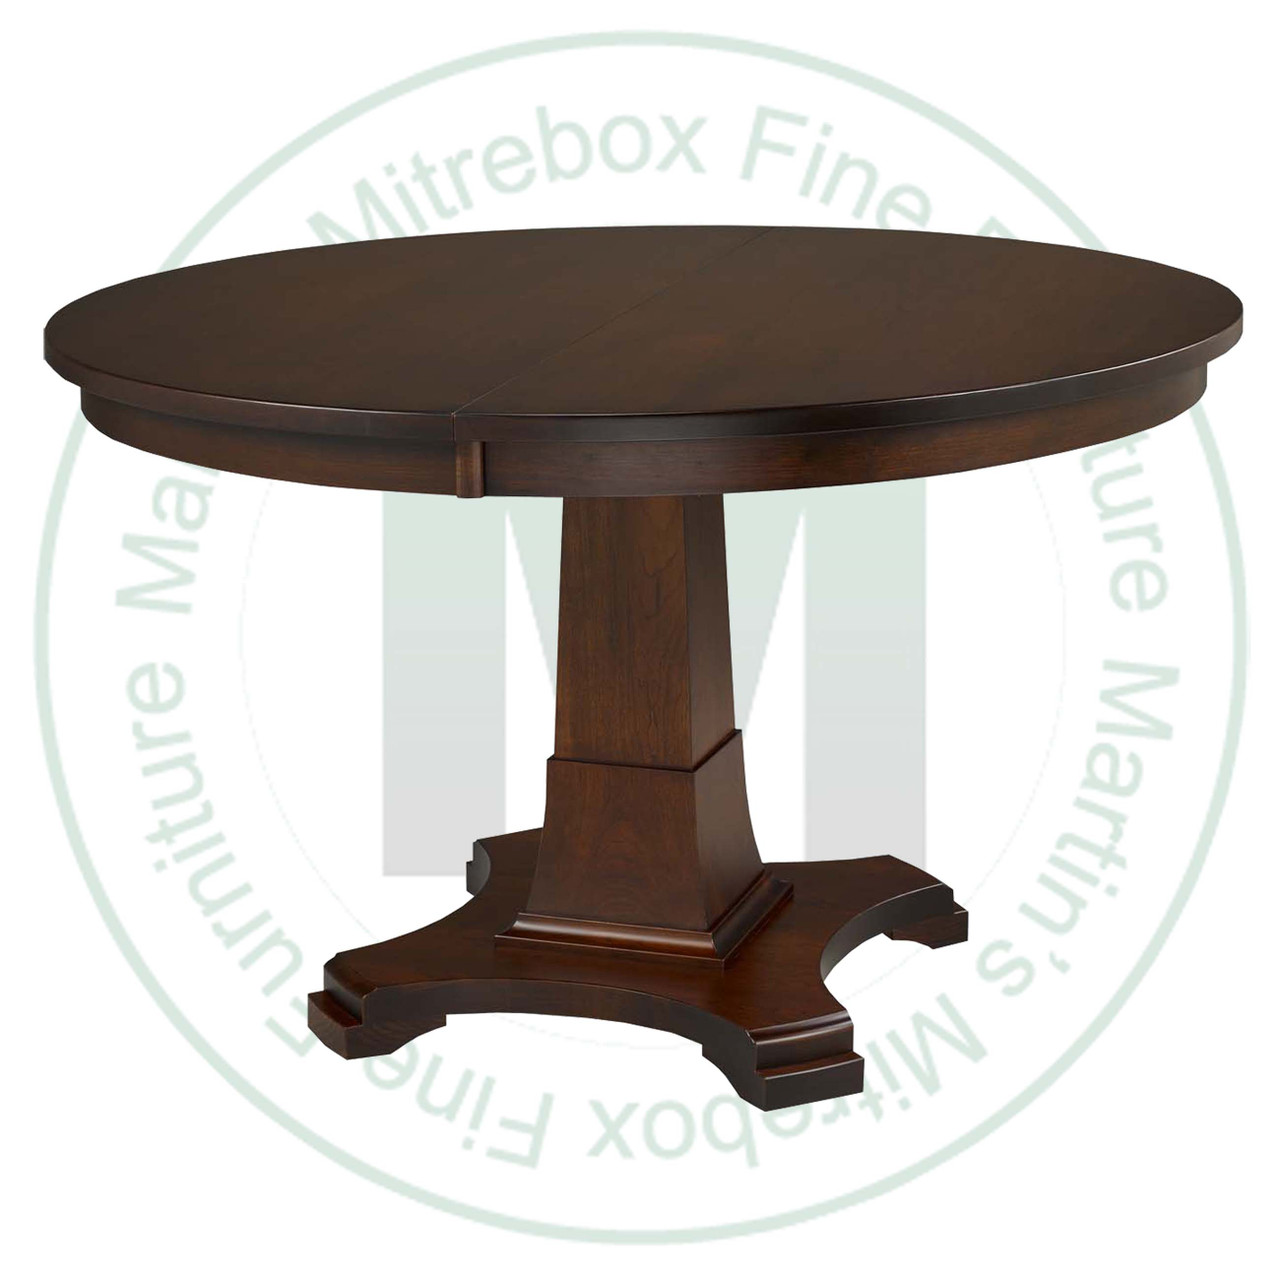 Oak Abbey Single Pedestal Table 36''D x 36''W x 30''H With 2 - 12'' Leaves. Table Has 1'' Thick Top